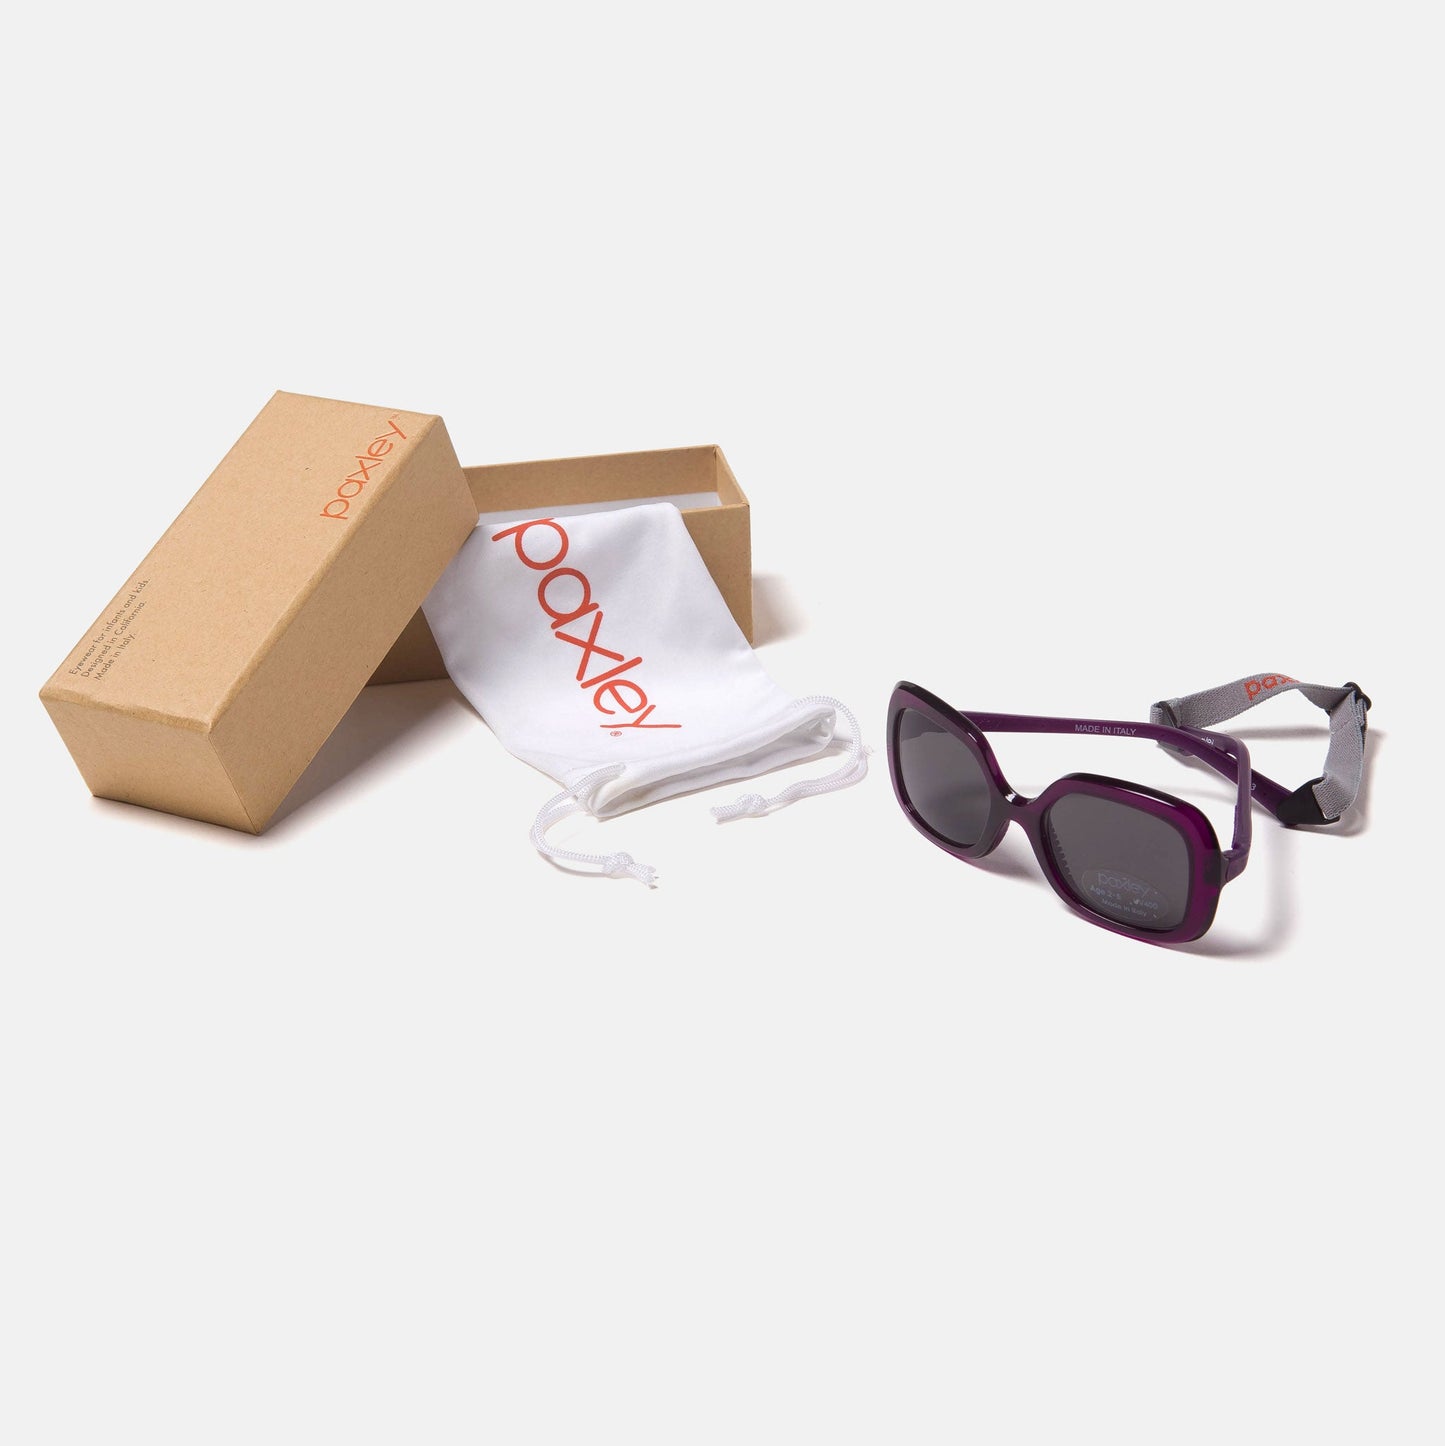 Paxley Sunglasses for Kids Larchmont Plum 0-5 Packaging